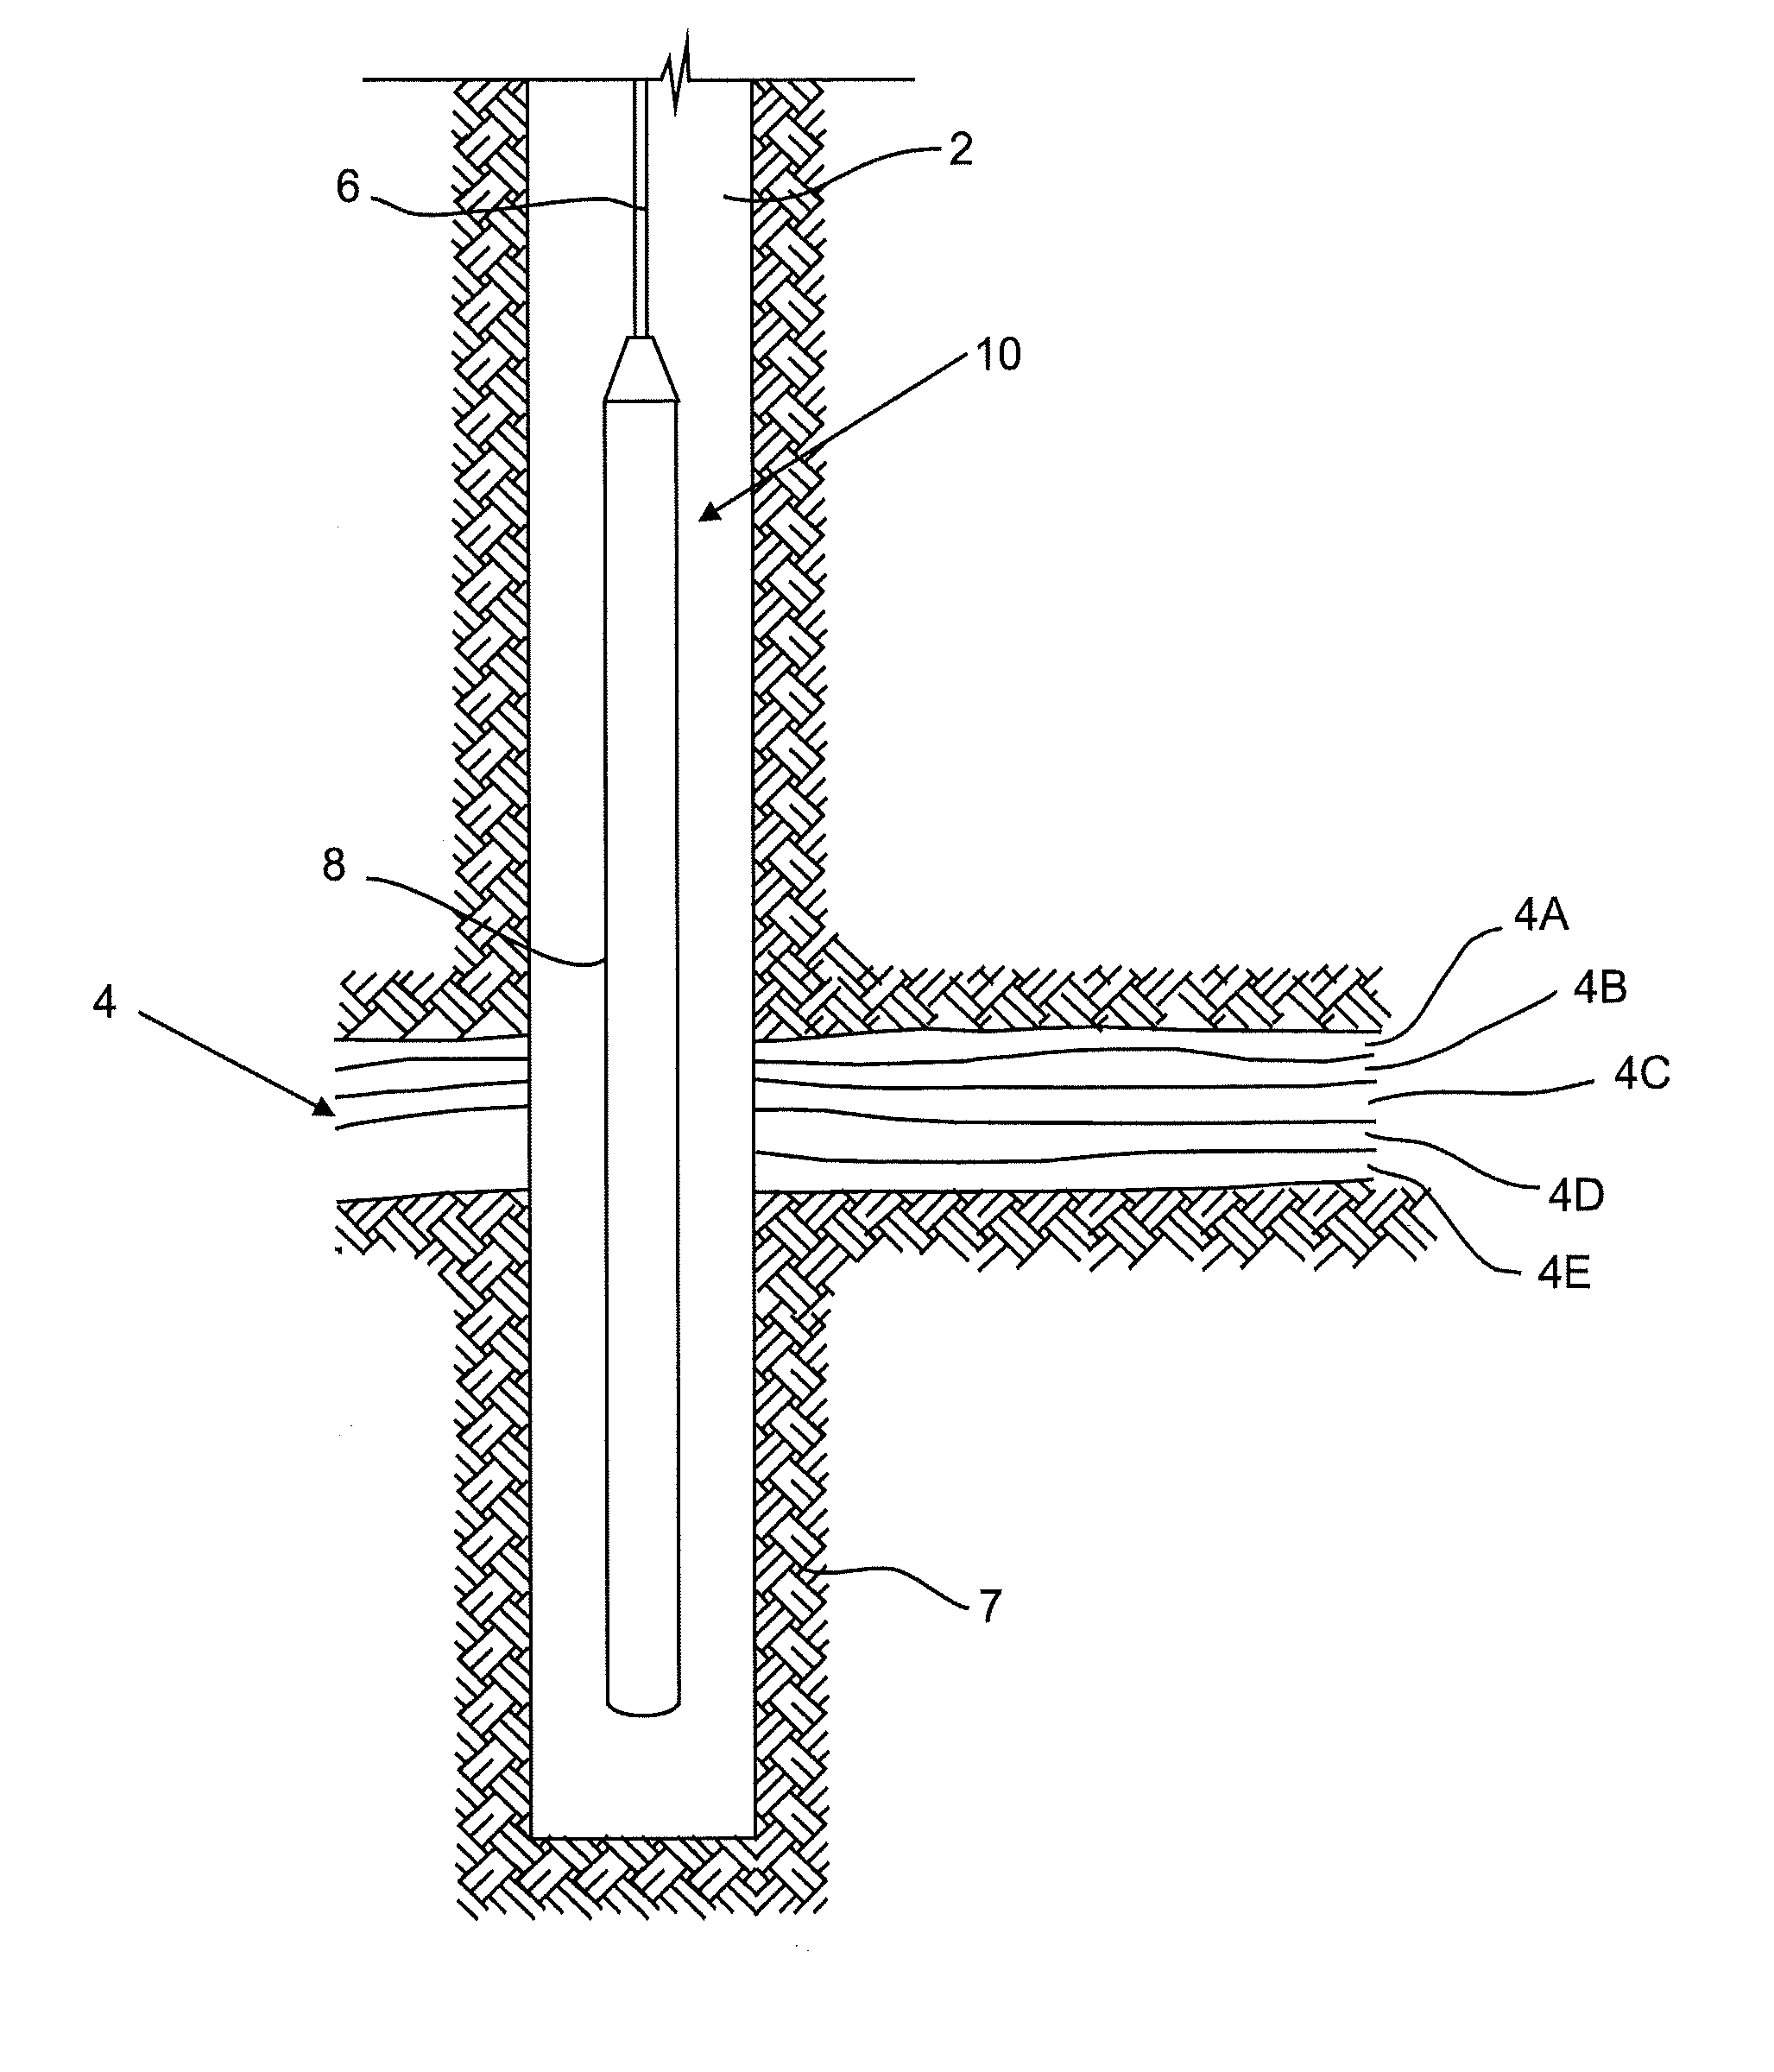 Inelastic background correction for a pulsed-neutron instrument